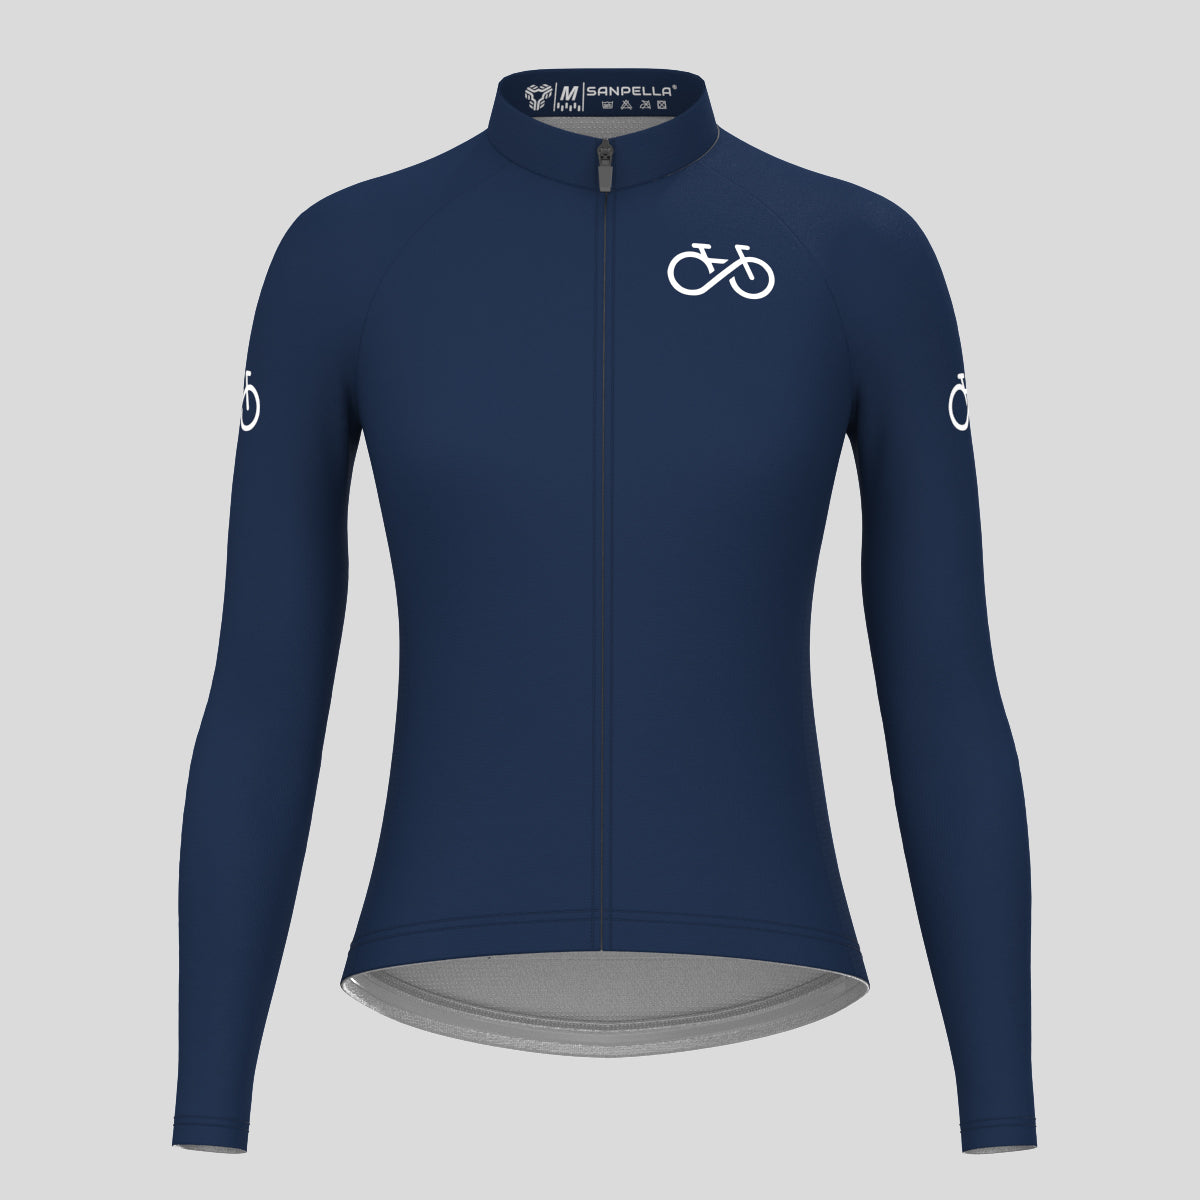 Ride Forever Women's LS Cycling Jersey - Navy